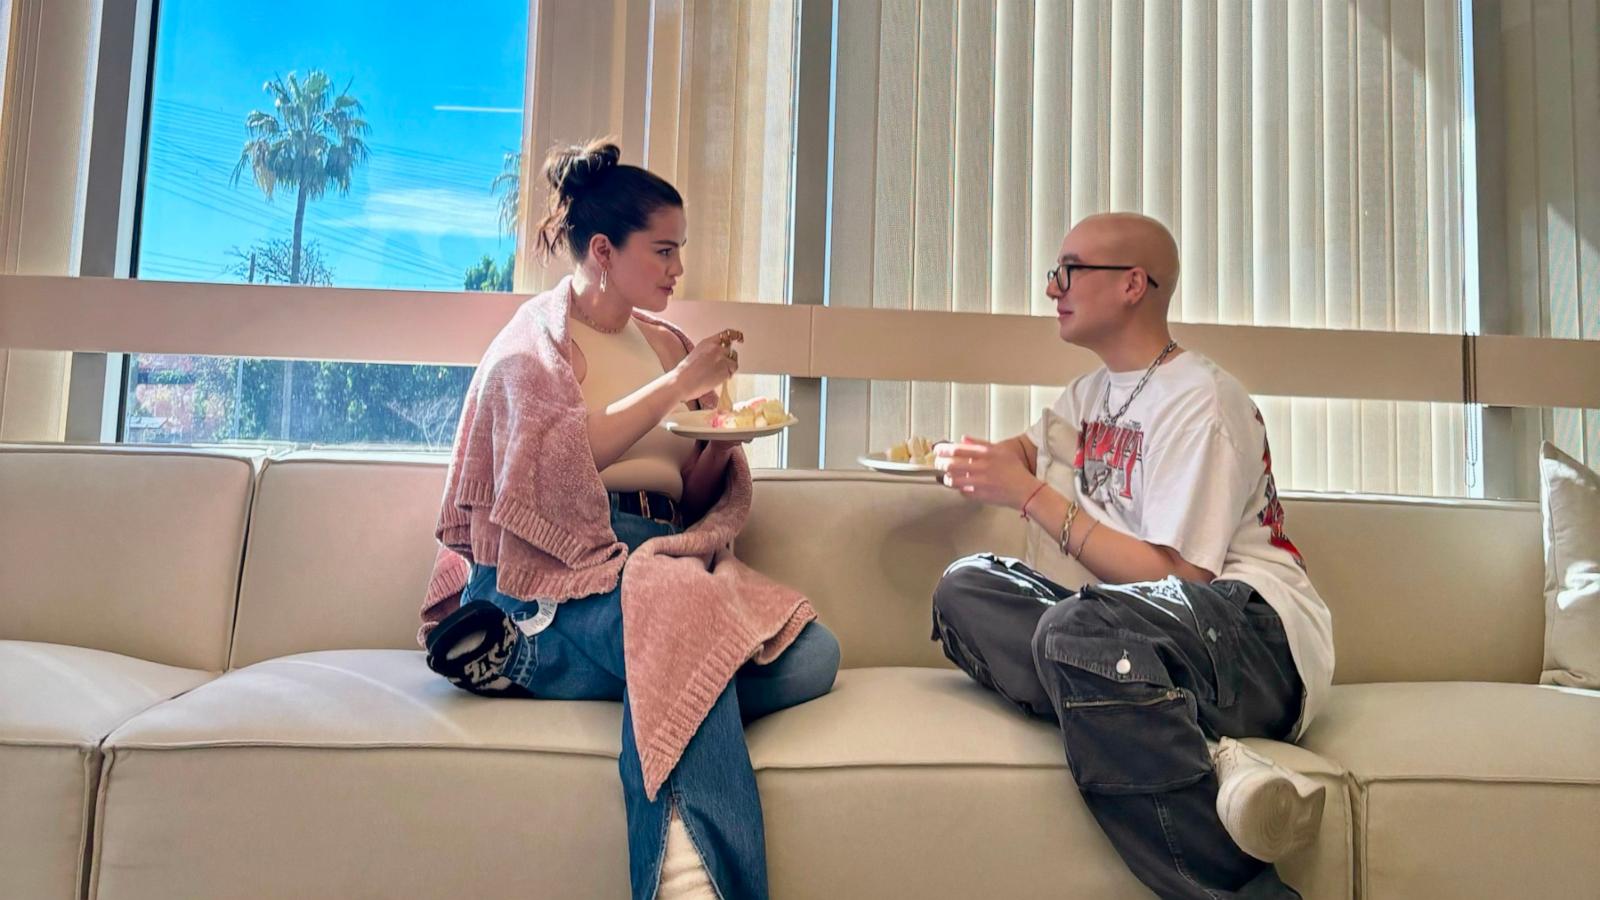 PHOTO: Timothy Bobrovitsky and Selena Gomez share a moment at the Rare Beauty office in Los Angeles.